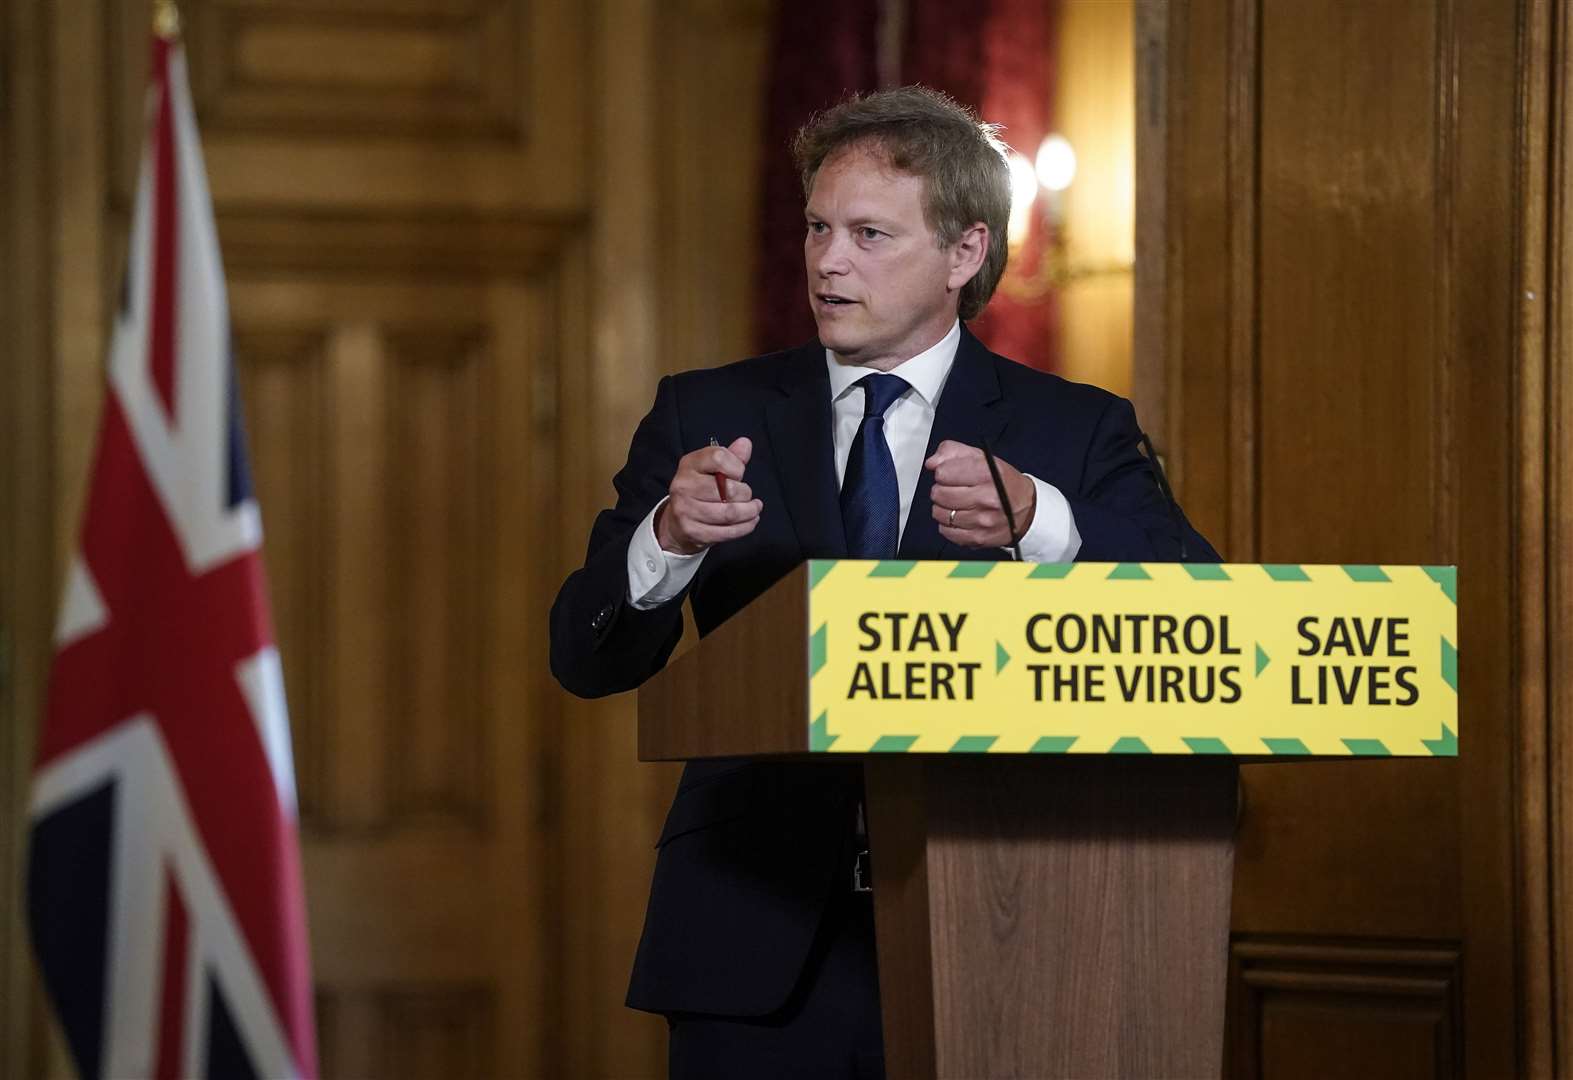 Transport Secretary Grant Shapps defended Dominic Cummings during the daily Downing Street press briefing (Andrew Parsons/10 Downing Street/Crown Copyright)